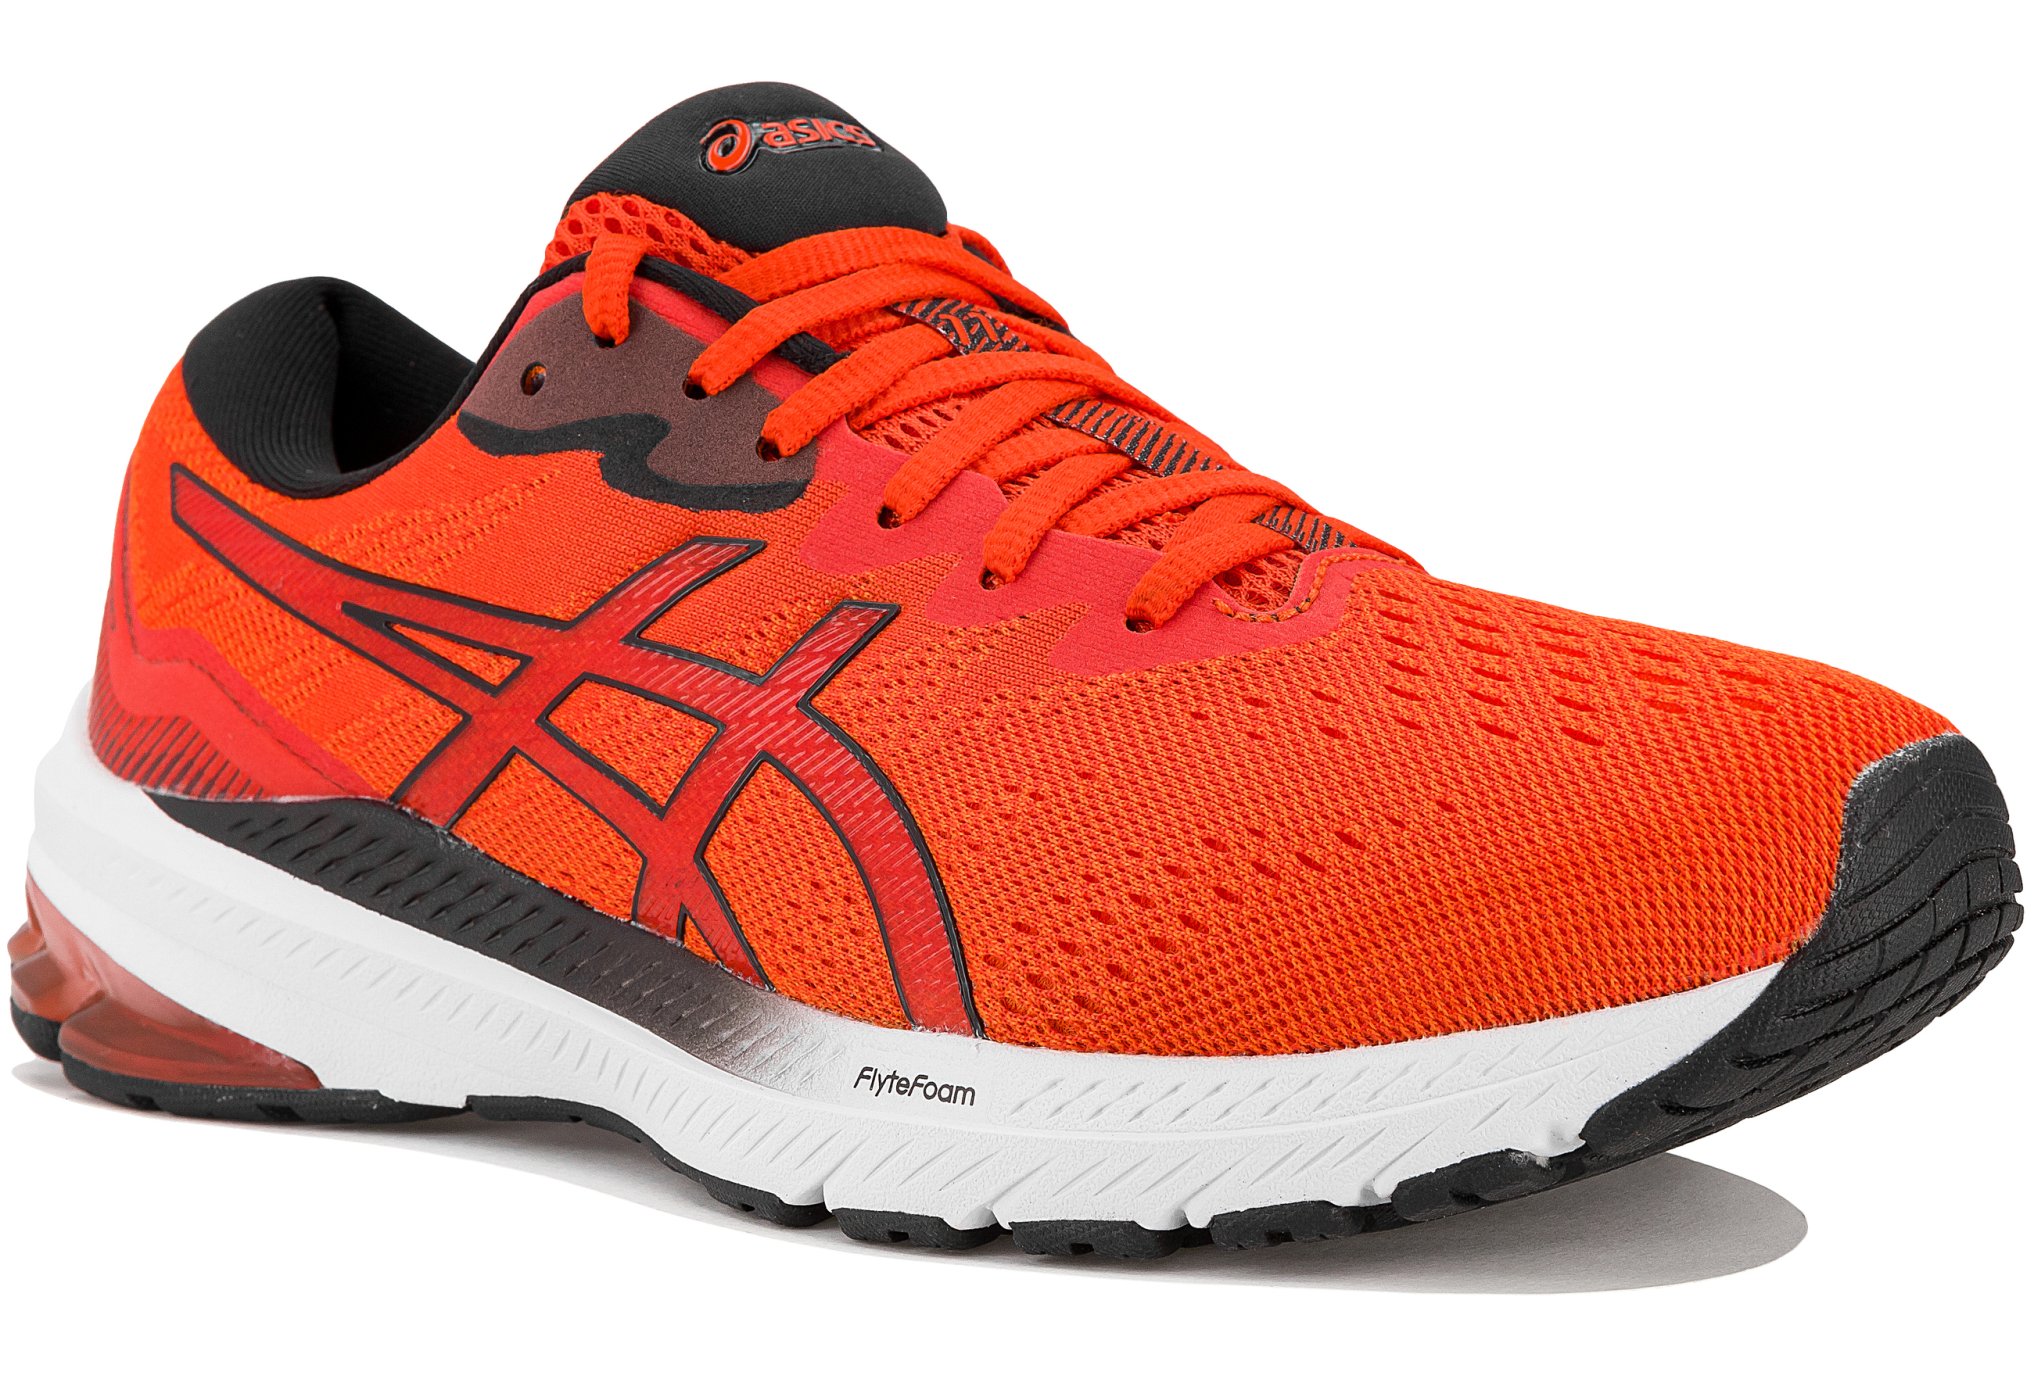 Asics GT-1000 11 M Chaussures homme